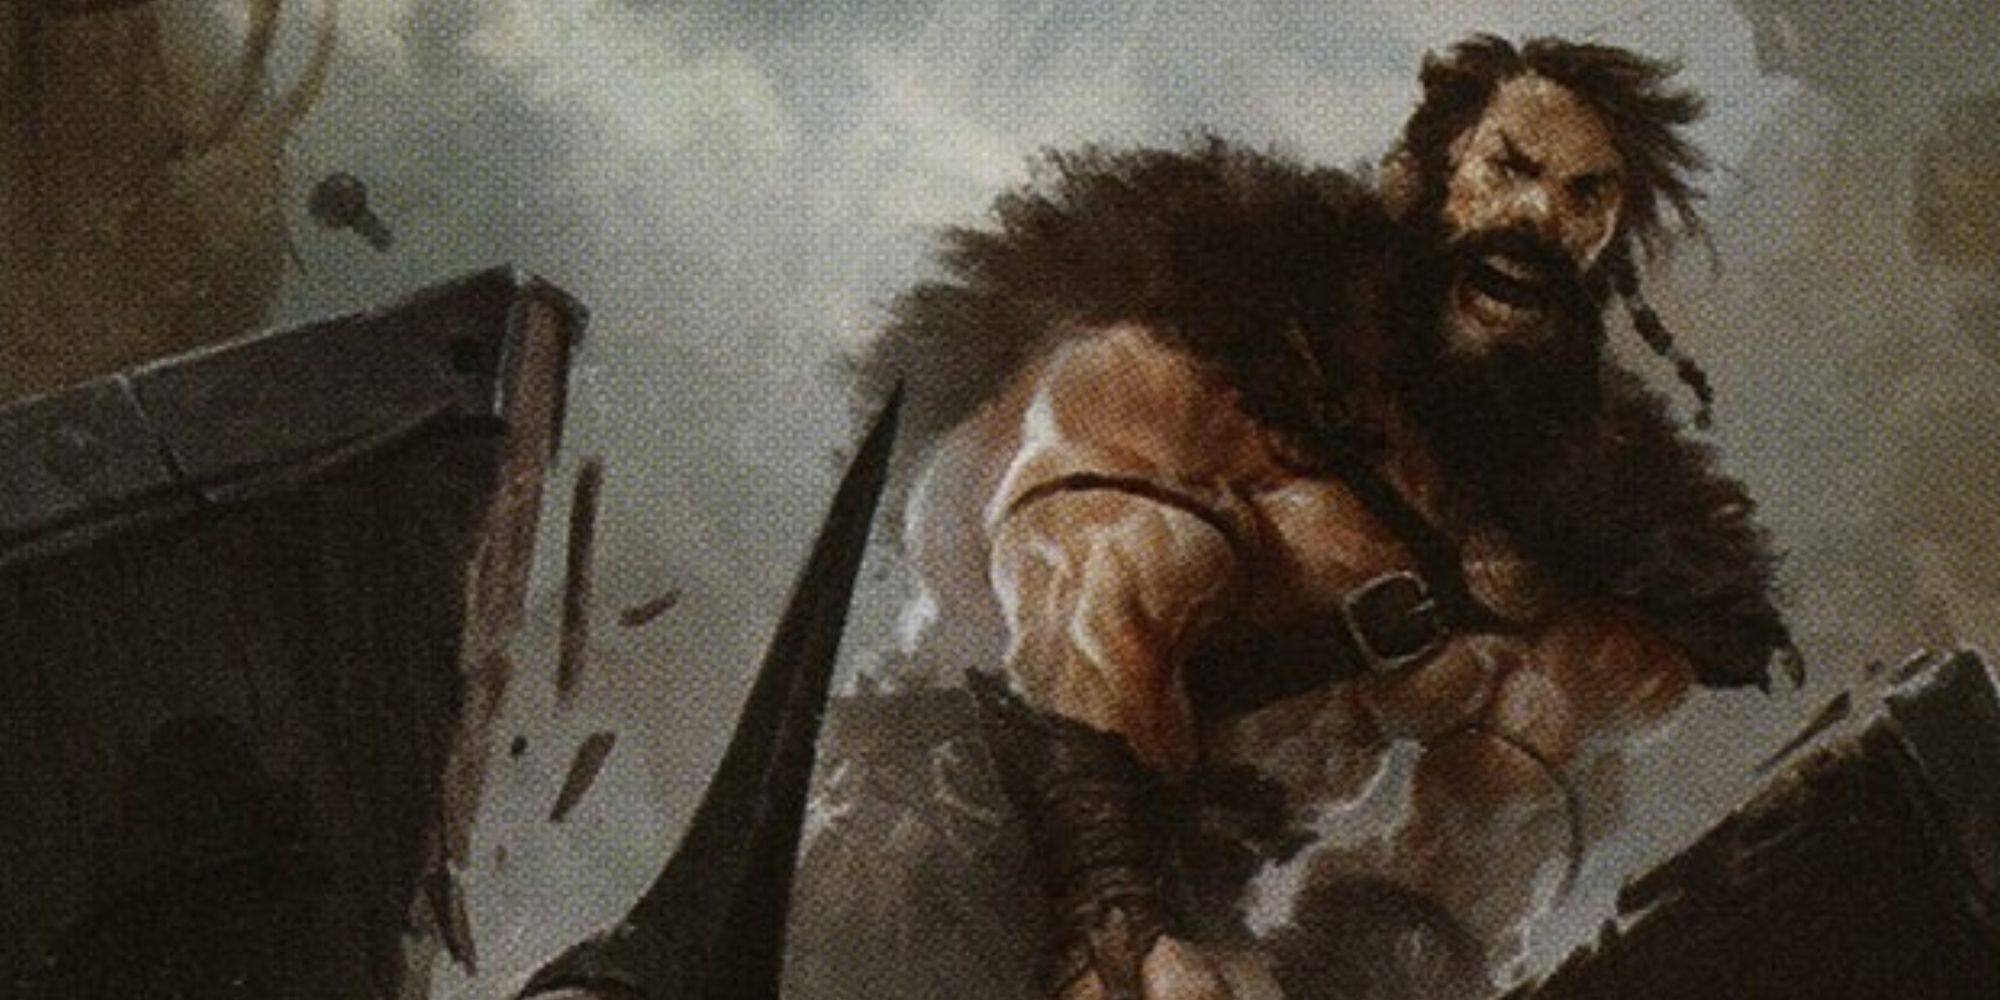 A large barbarian chopping wood with an axe